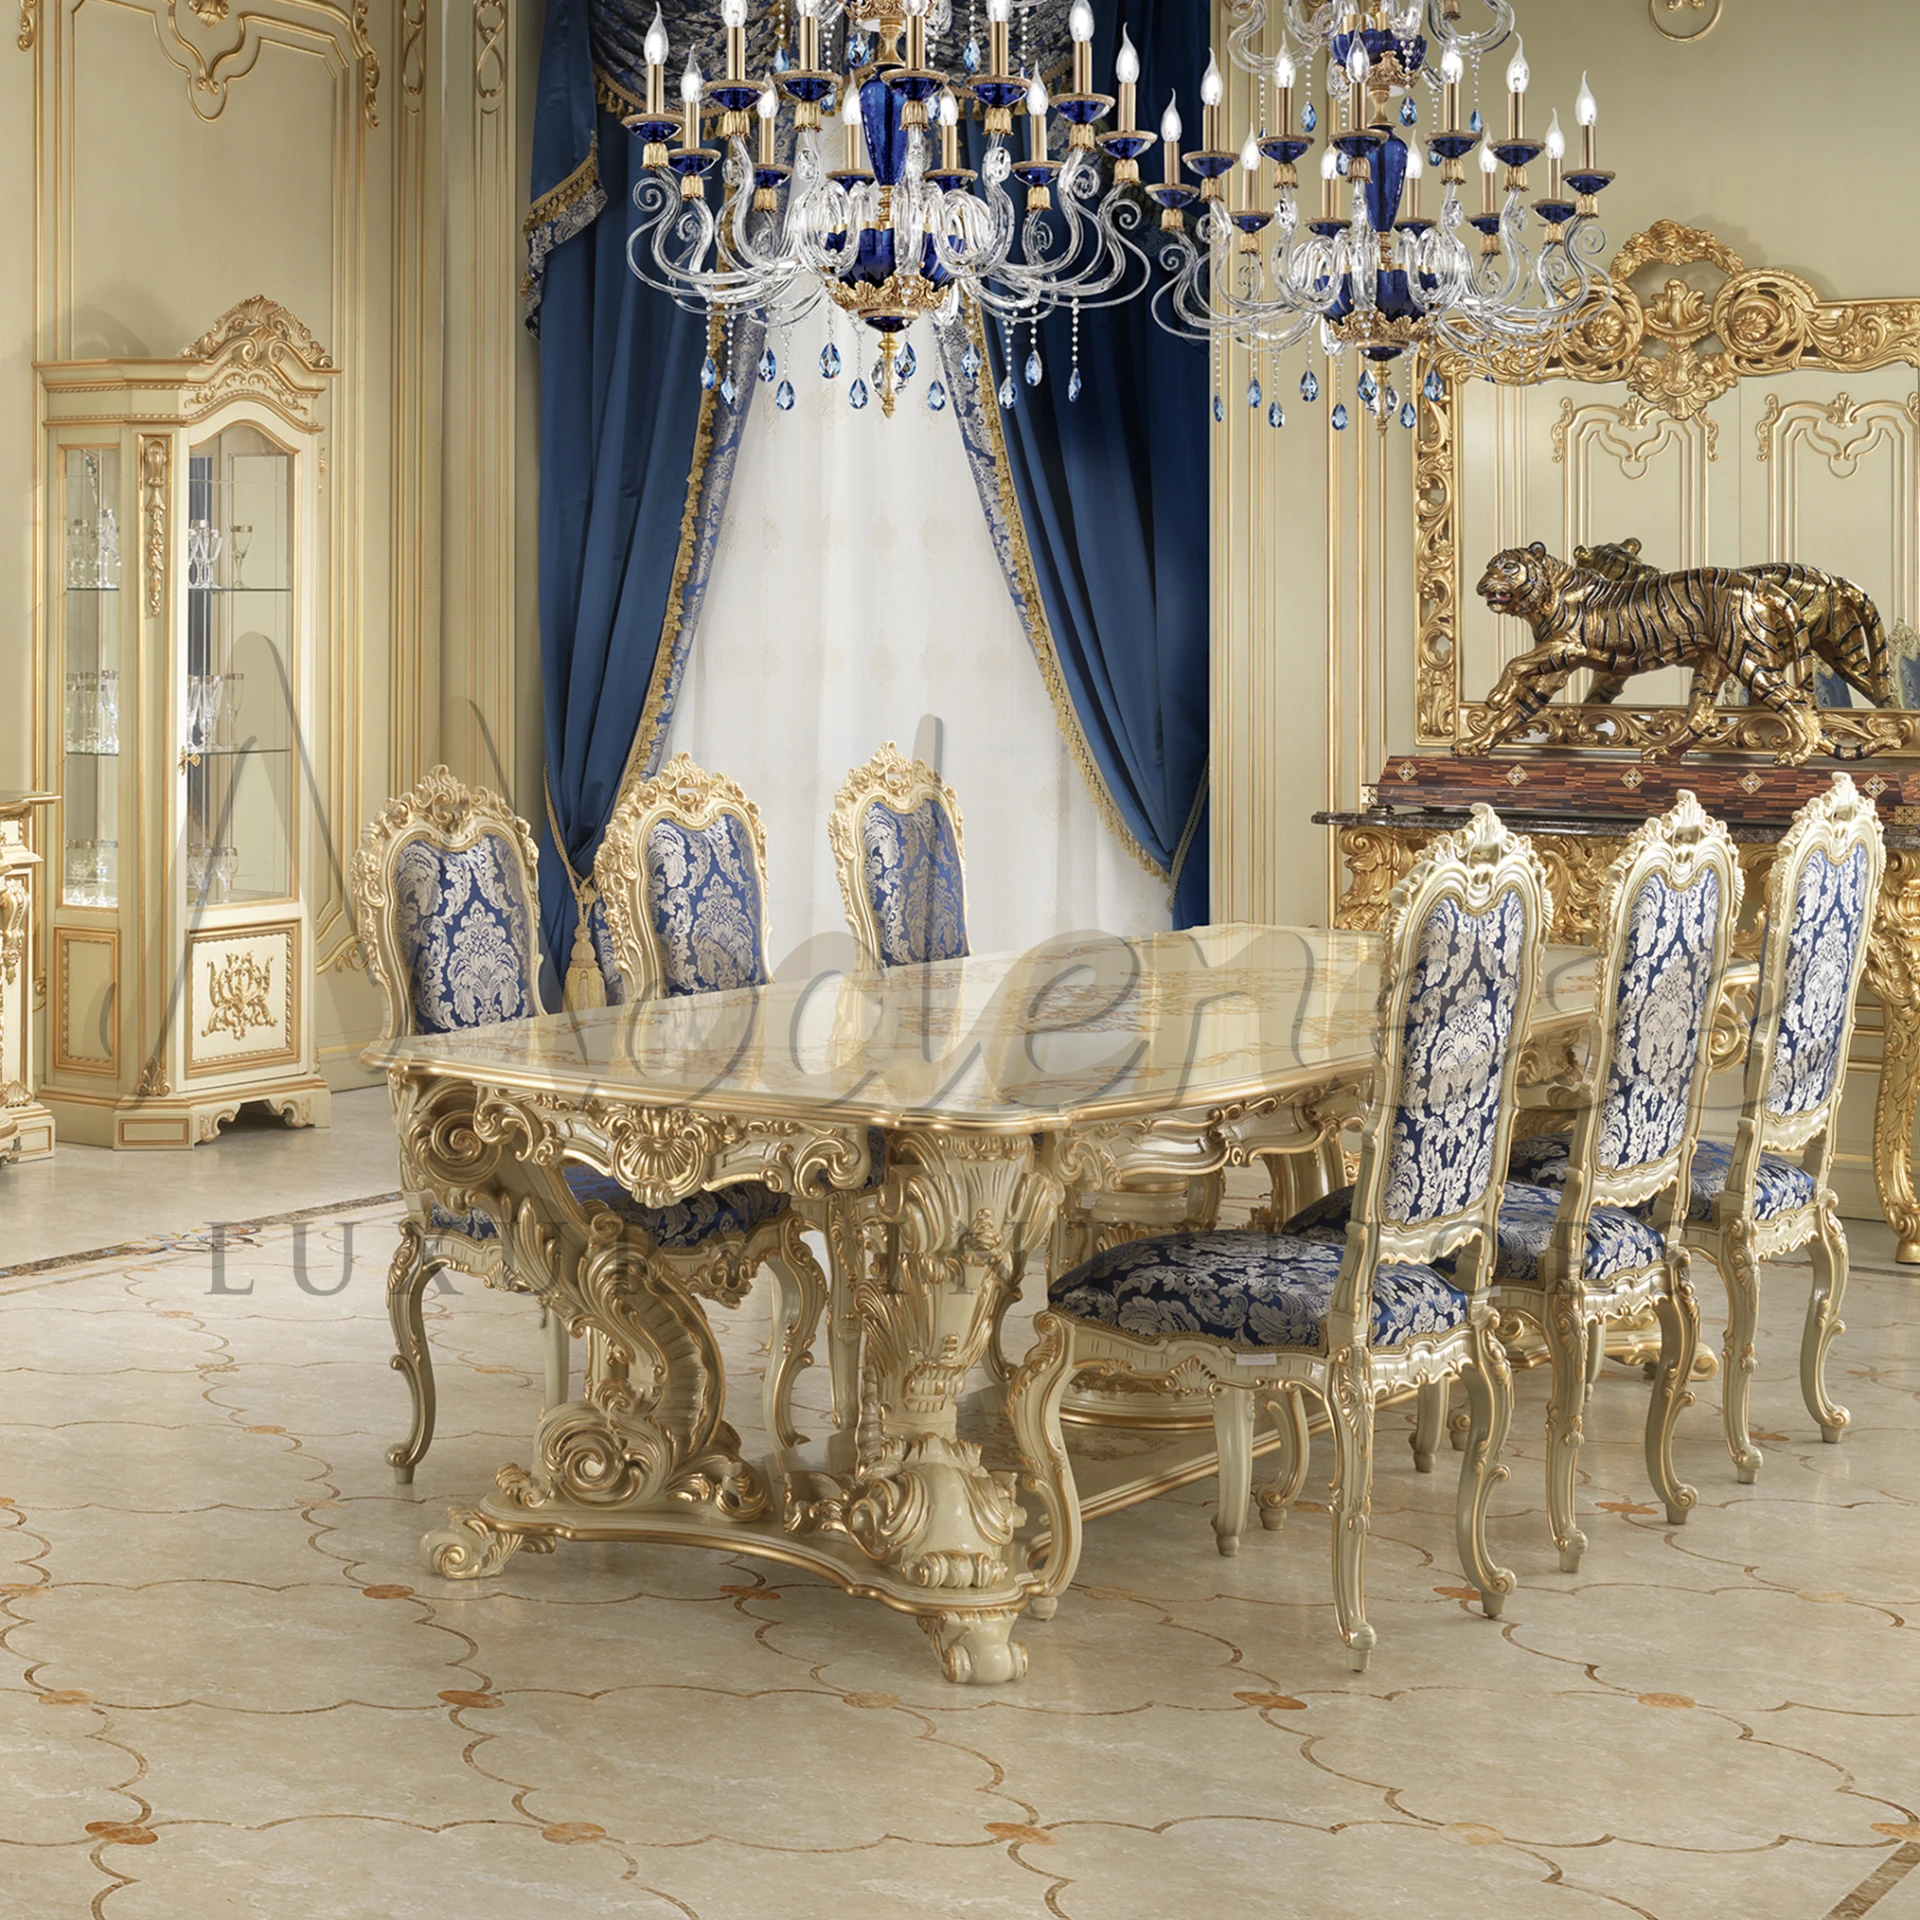 Fancy room with a sparkly light, white table with gold designs, and flowery chairs.